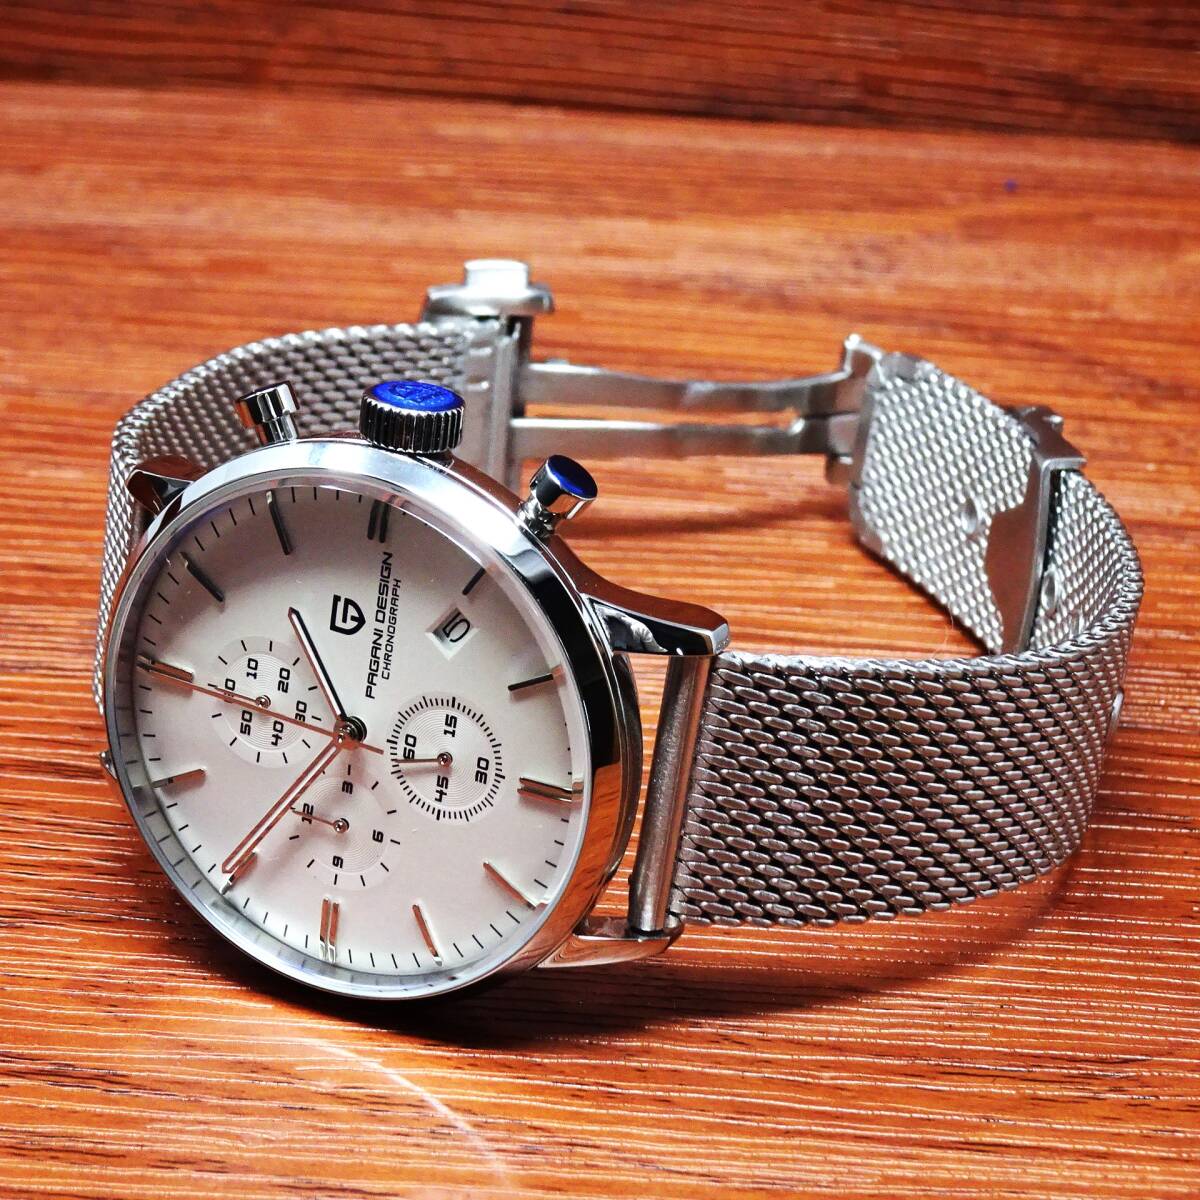  free shipping : new goods * Pagani wristwatch men's VK67 chronograph quartz type small second business wristwatch * mesh made of stainless steel belt *PD-2720